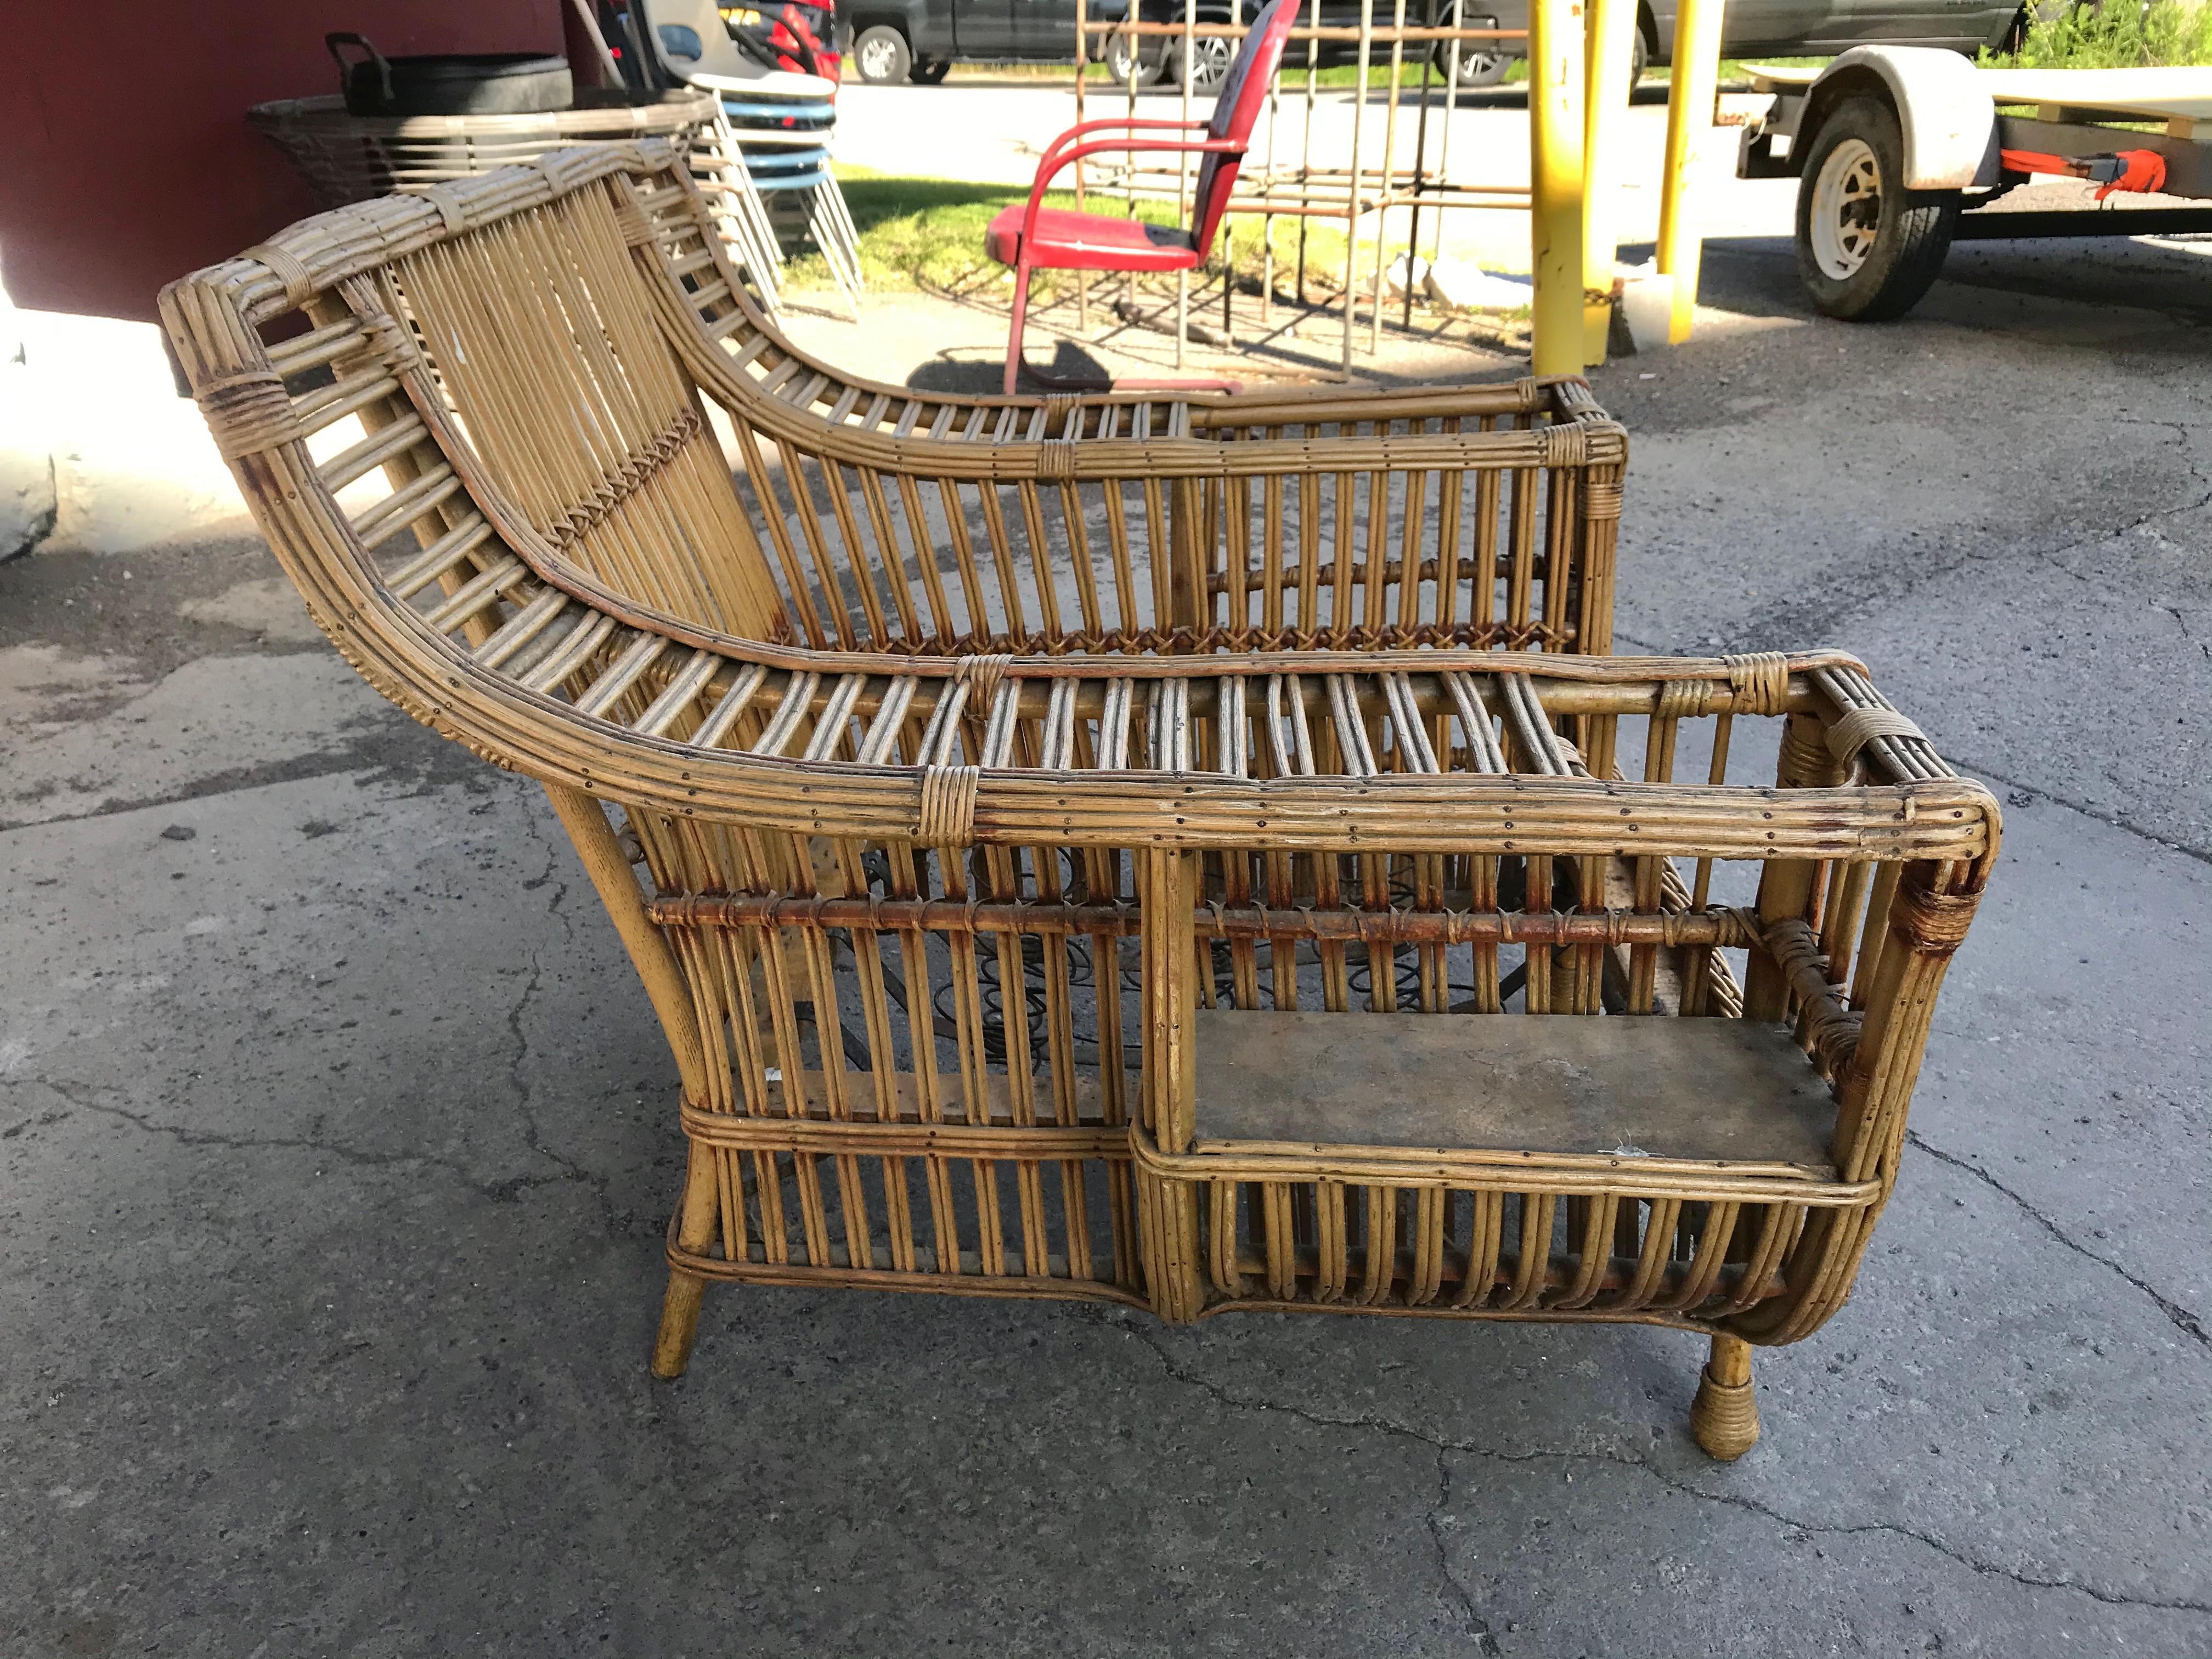 Rare Art Deco Split Reed / Stick Wicker 3 piece Suite, Niagara Reedcraft Co., Made in Niagara Falls New York, amazing set consisting of sofa and two lounge chairs, complete with magazine holders and cup holders, retains original finish, faint